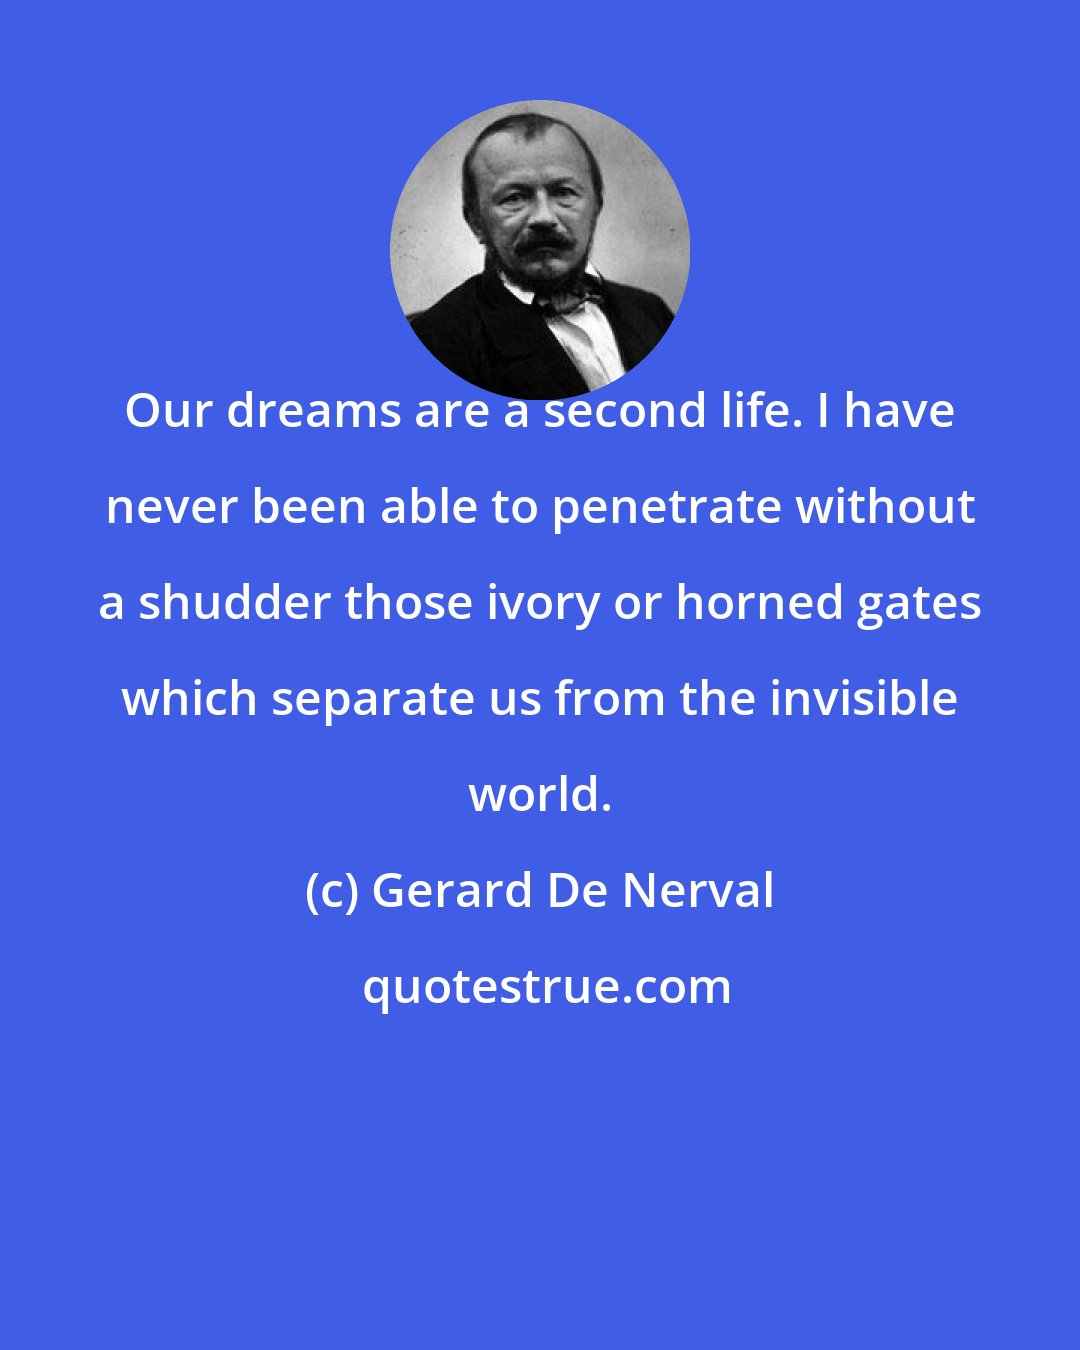 Gerard De Nerval: Our dreams are a second life. I have never been able to penetrate without a shudder those ivory or horned gates which separate us from the invisible world.